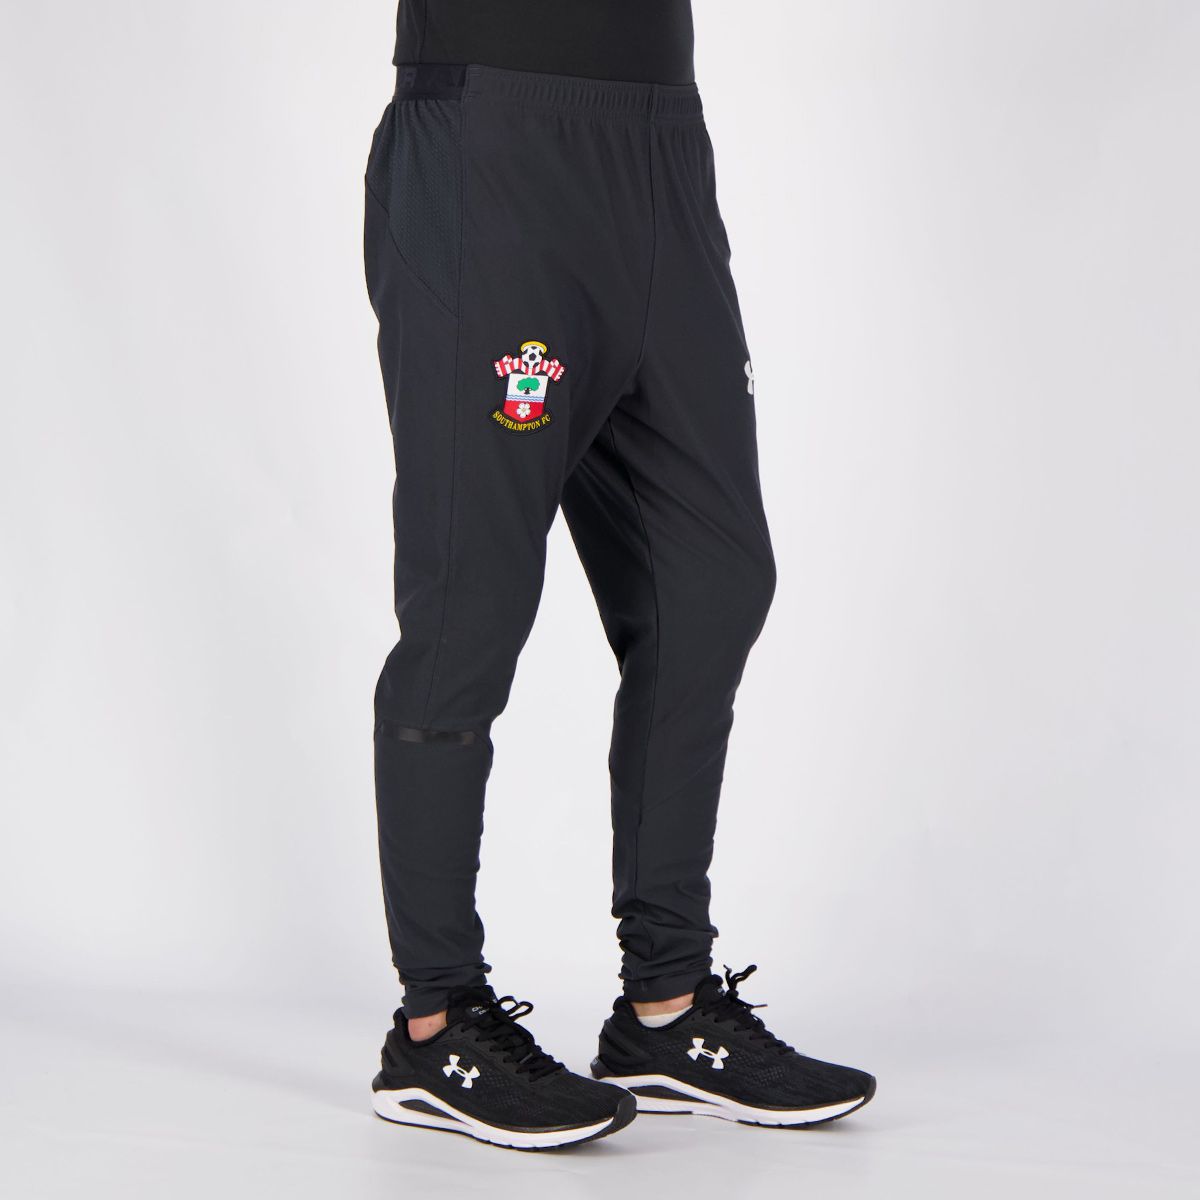 Official Southampton Away Shorts Trousers Bottoms 2018 19 Mens Under Armour 